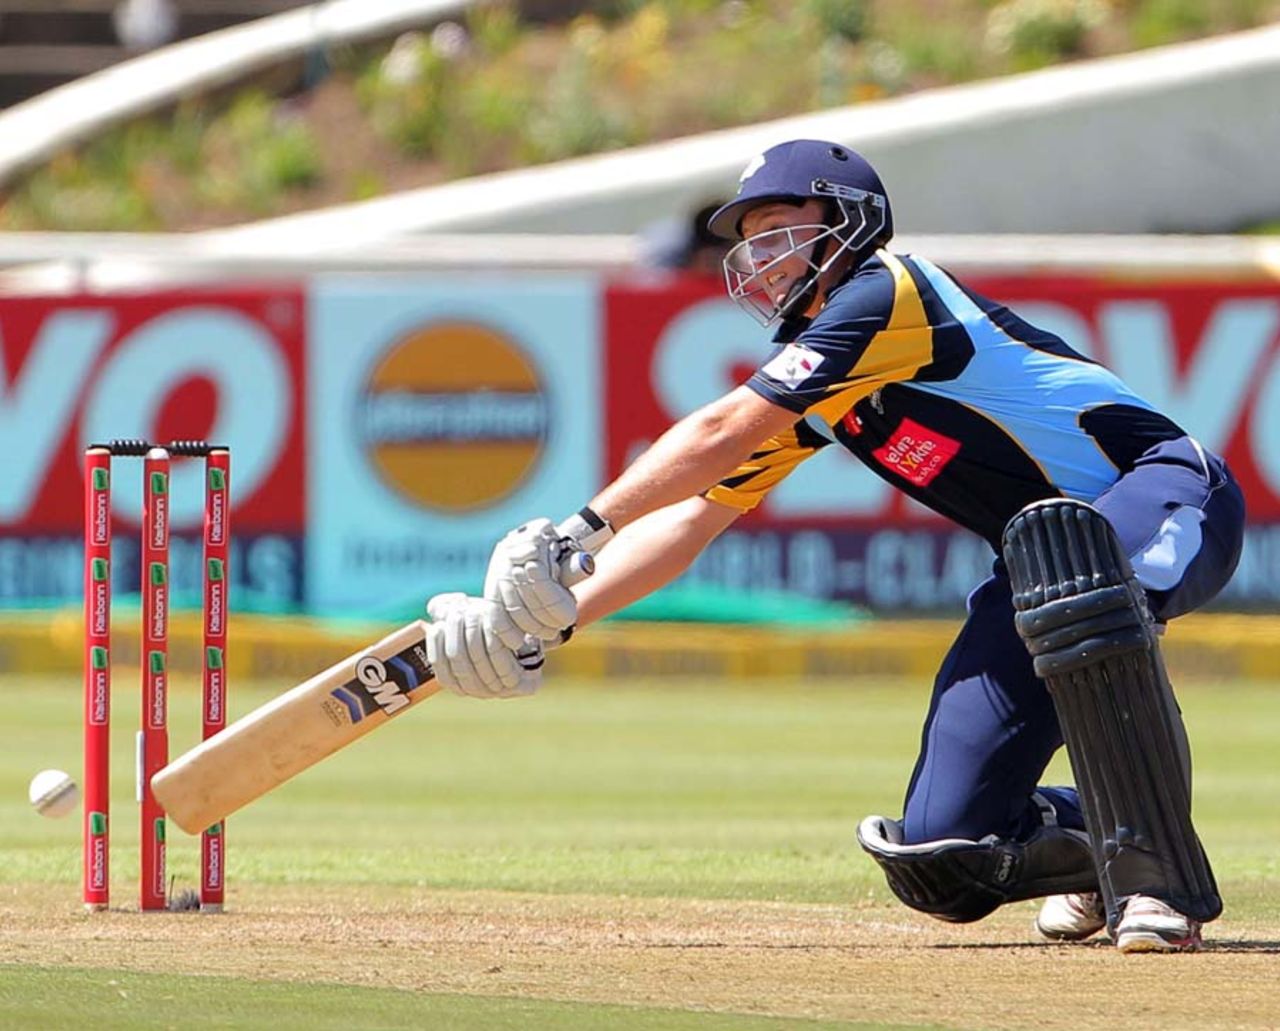 Joe Root top-scored for Yorkshire with 25, Sydney Sixers v Yorkshire, Group B, Champions League Twenty20, Cape Town, October 16, 2012